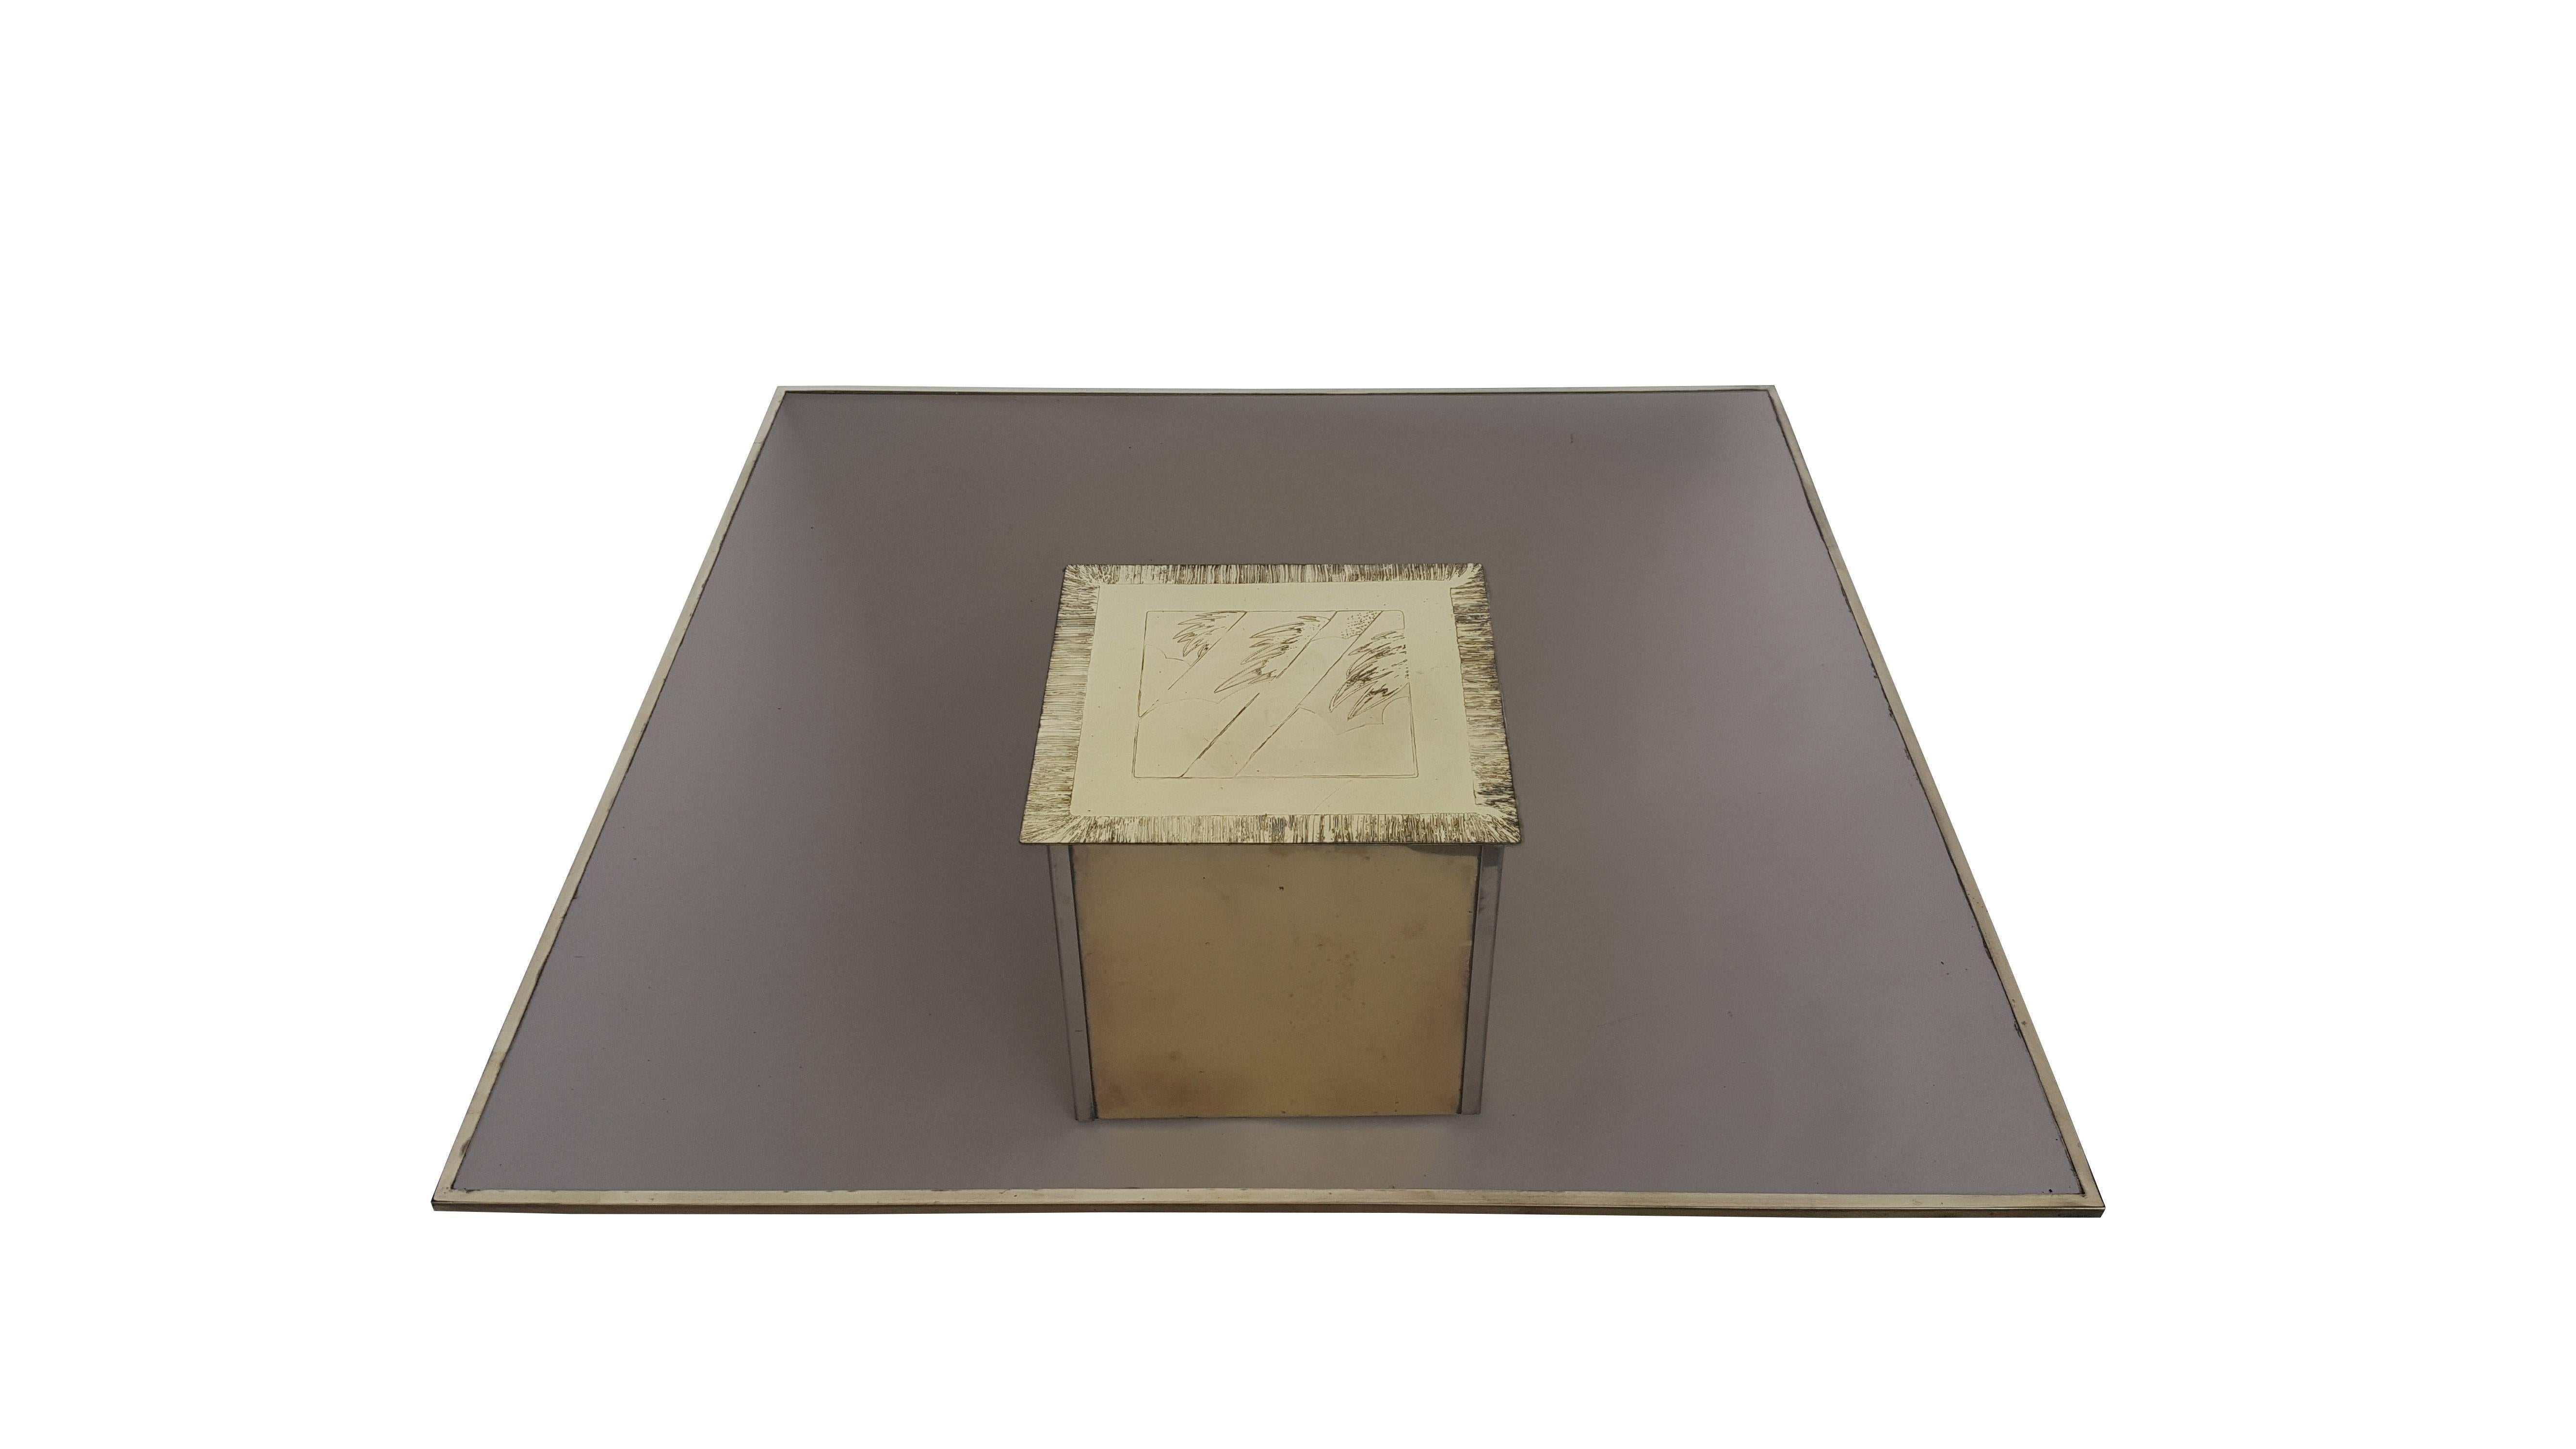 Impressive, amazing, massive coffee table! 

Smoked glass tabletop.
Surrounded by a brass frame.
Brass etched plate in the middle.

In the style off Maison Jansen.